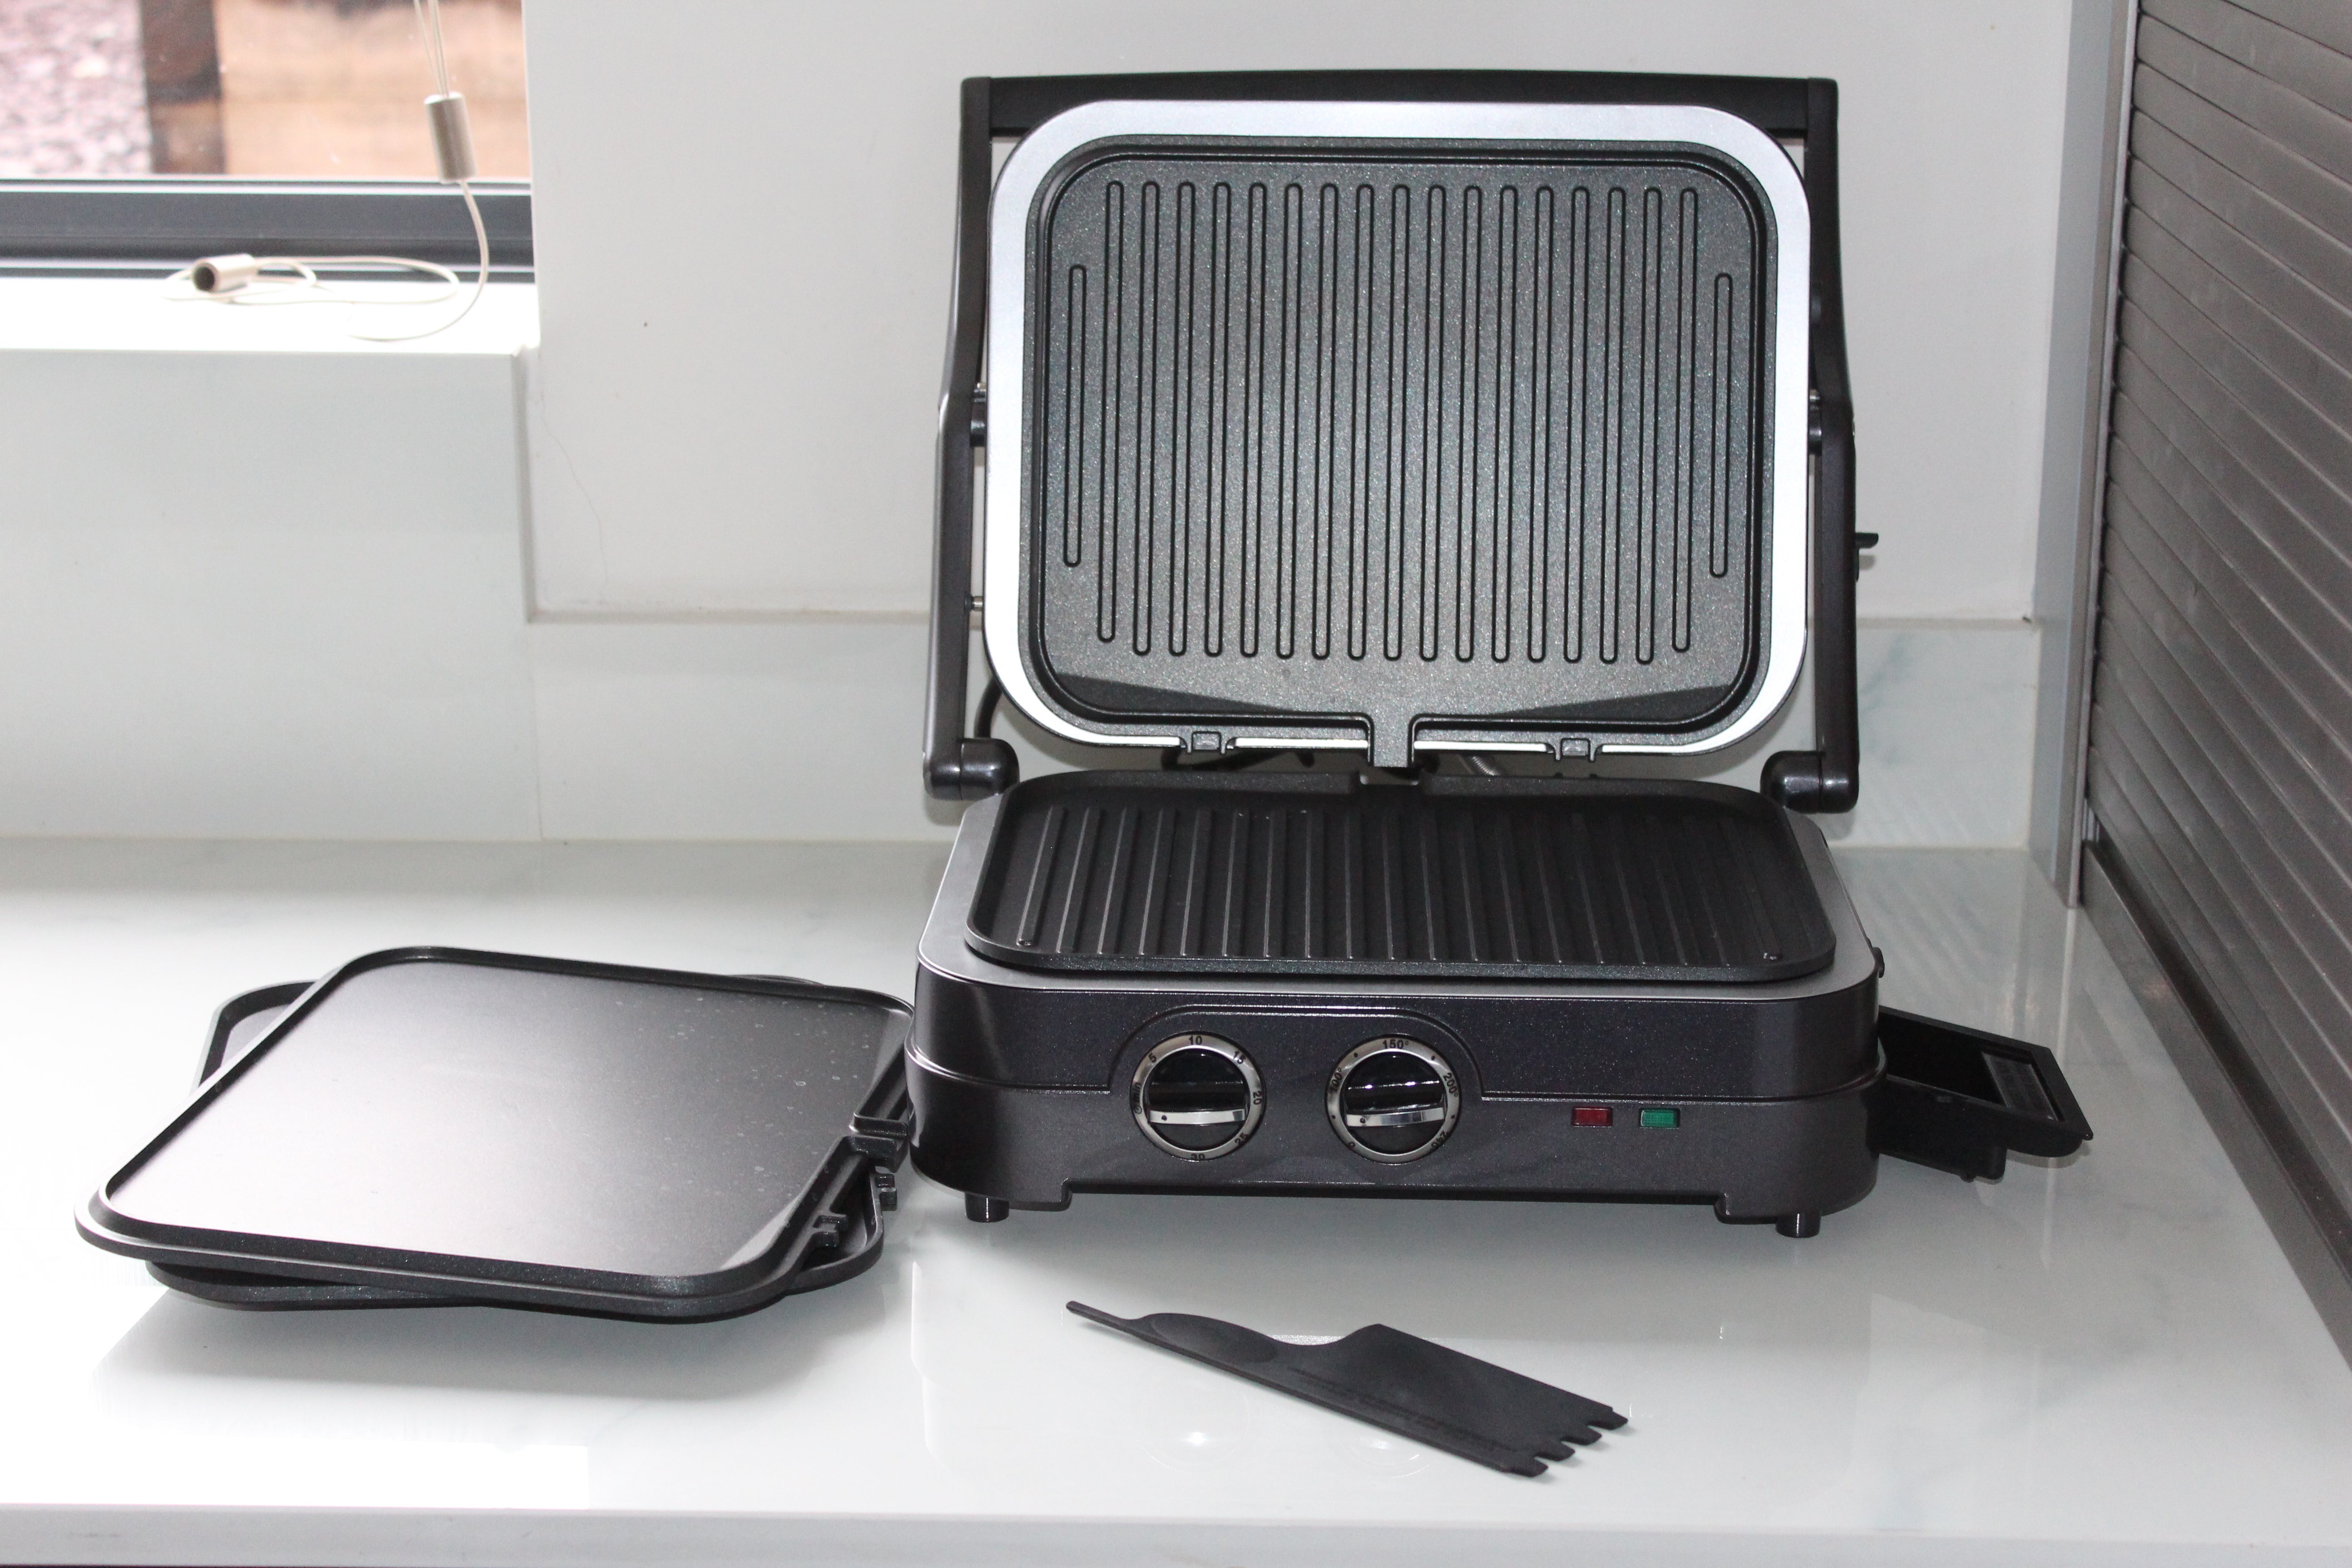 Cuisinart Griddle & Grill accessoriesPicture of a gray-black Cuisinart GR47BU Griddle-Grill kept disassembled on a kitchen platform